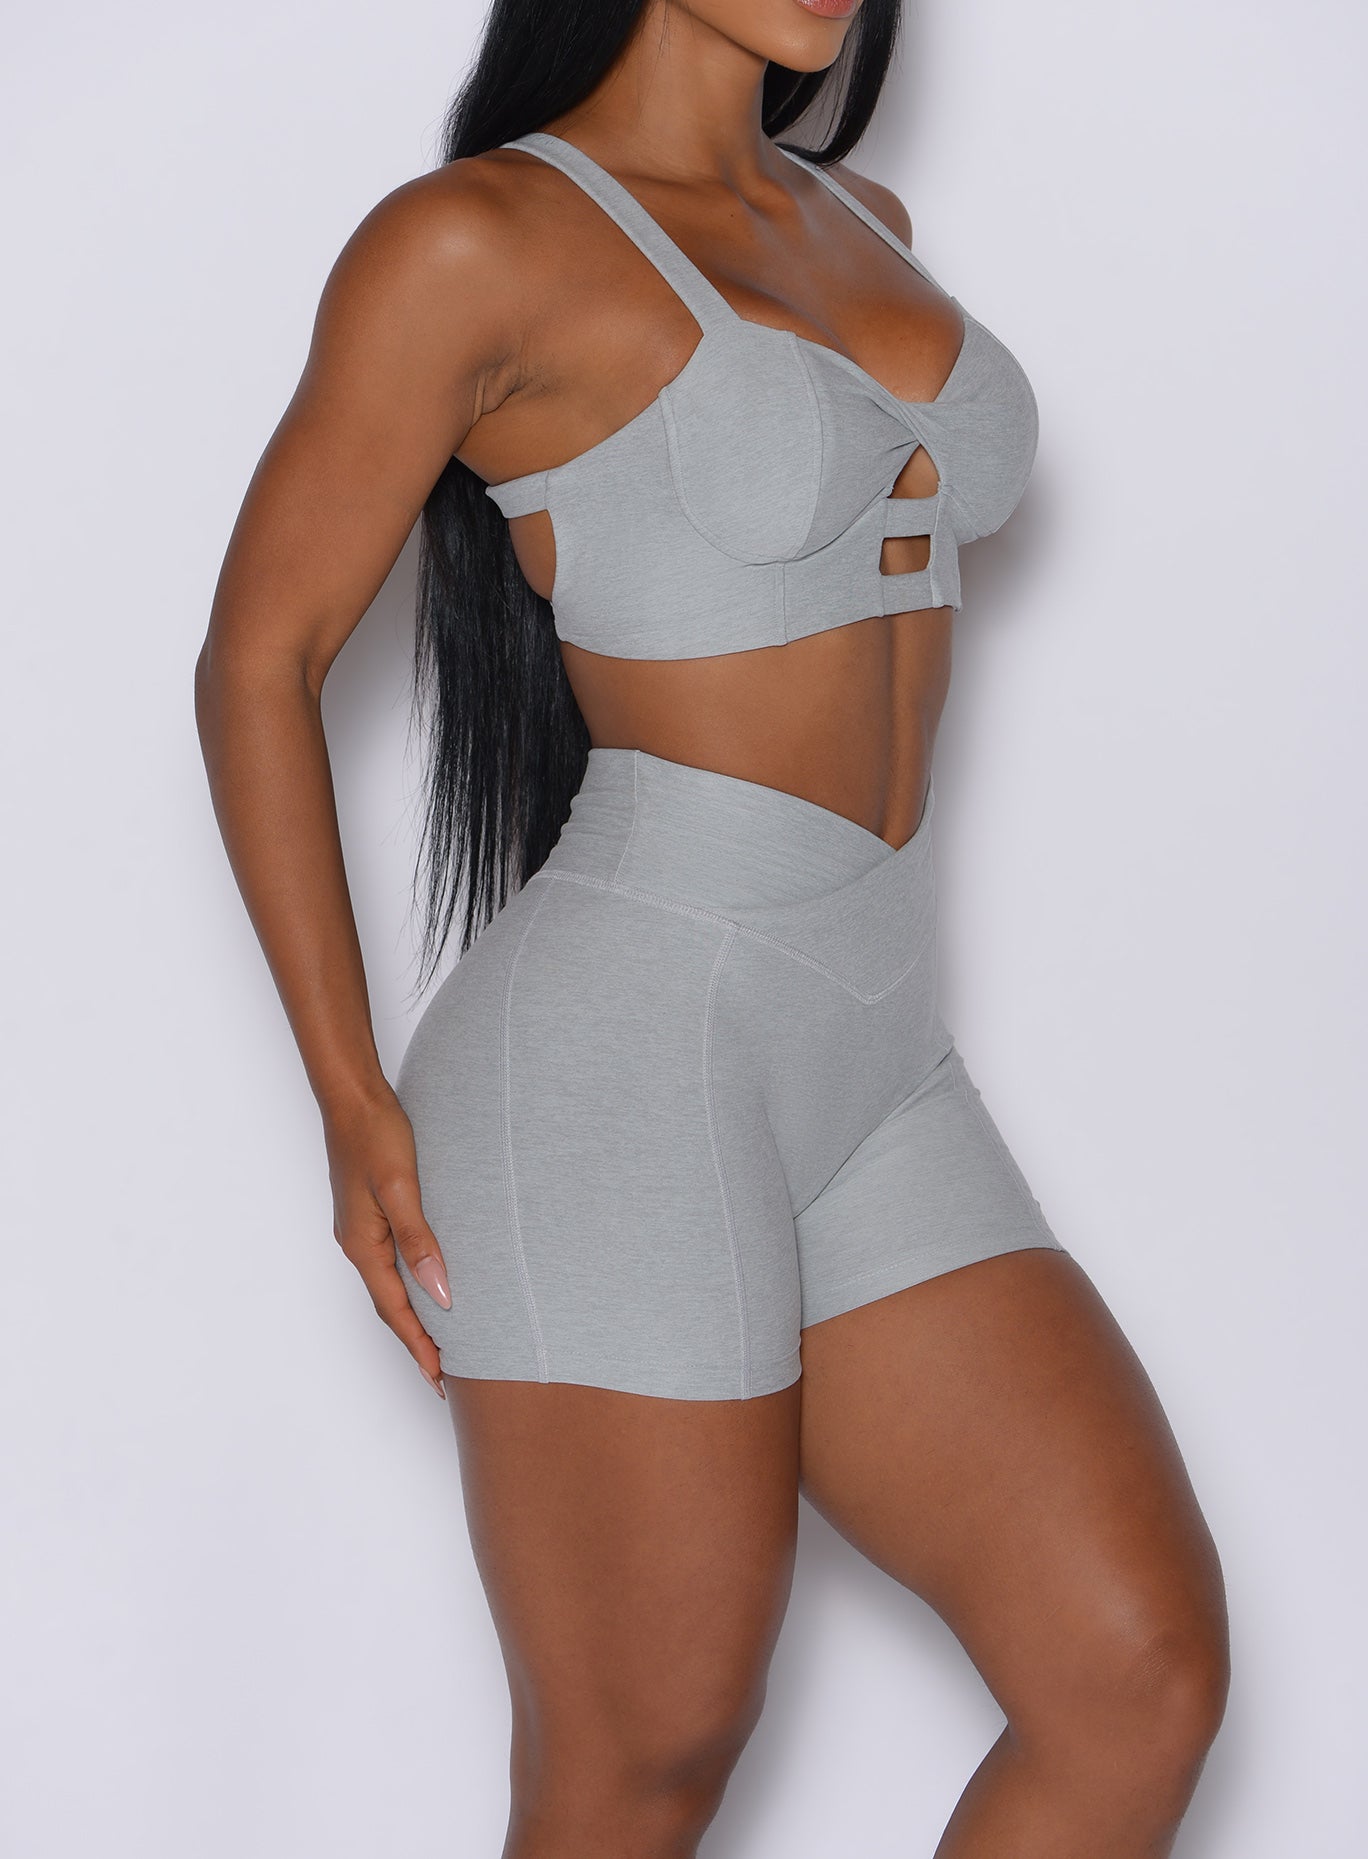 zoomed in right side view of a model in our Tiny Waist Shorts in Light Cloud color and a matching sports bra